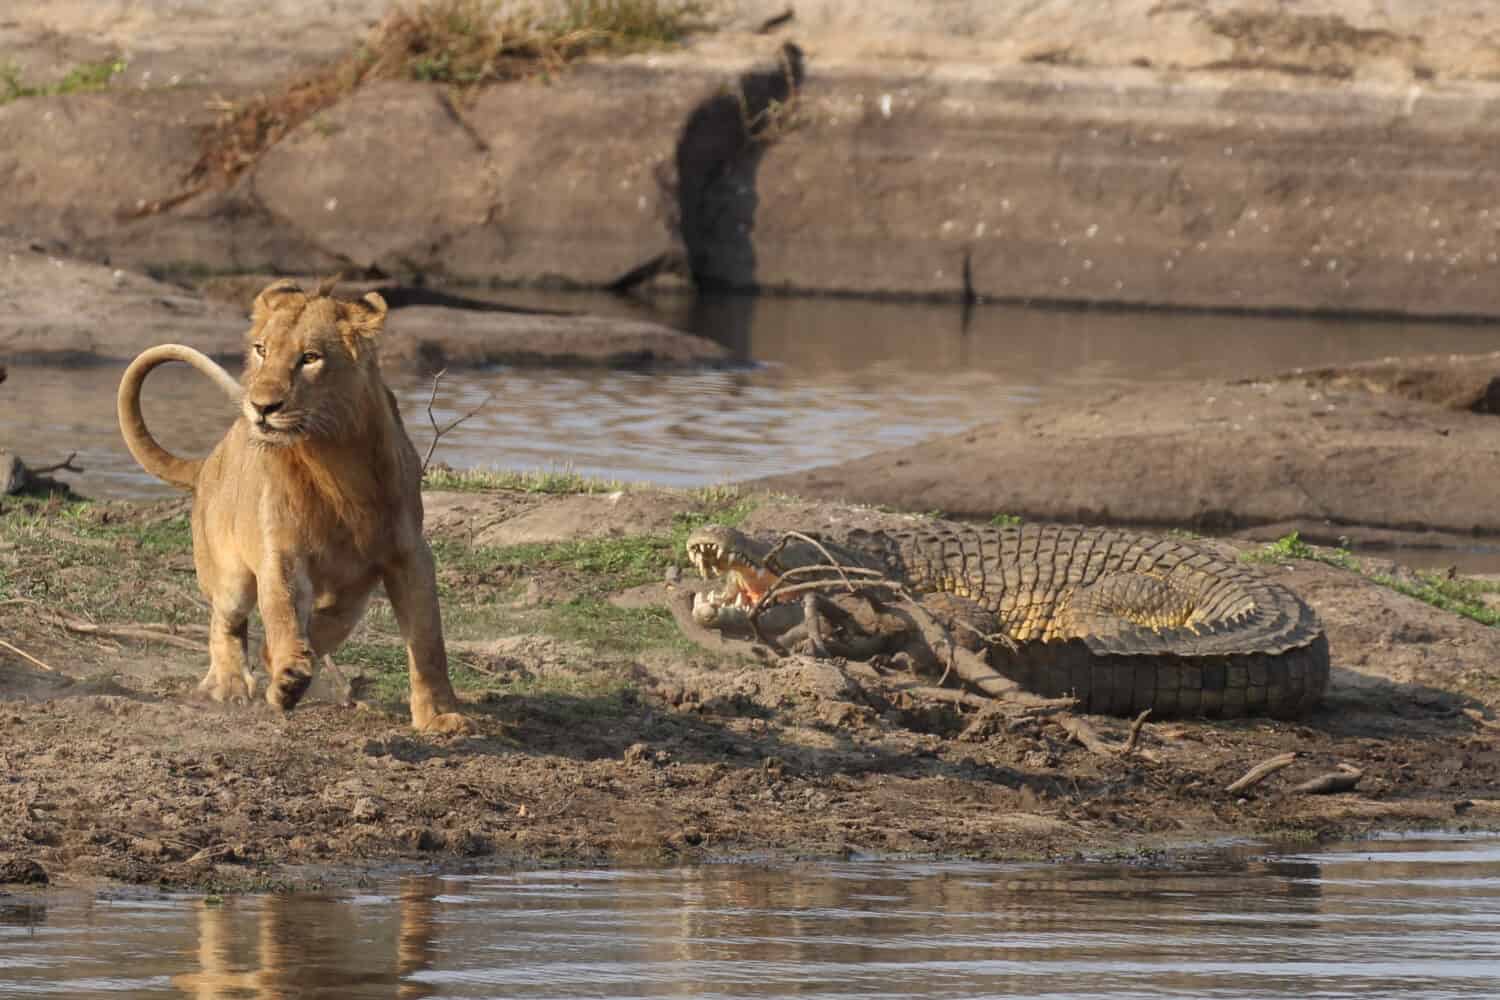 Hasty retreat, young male Lion panics at the sight of moving Crocodile